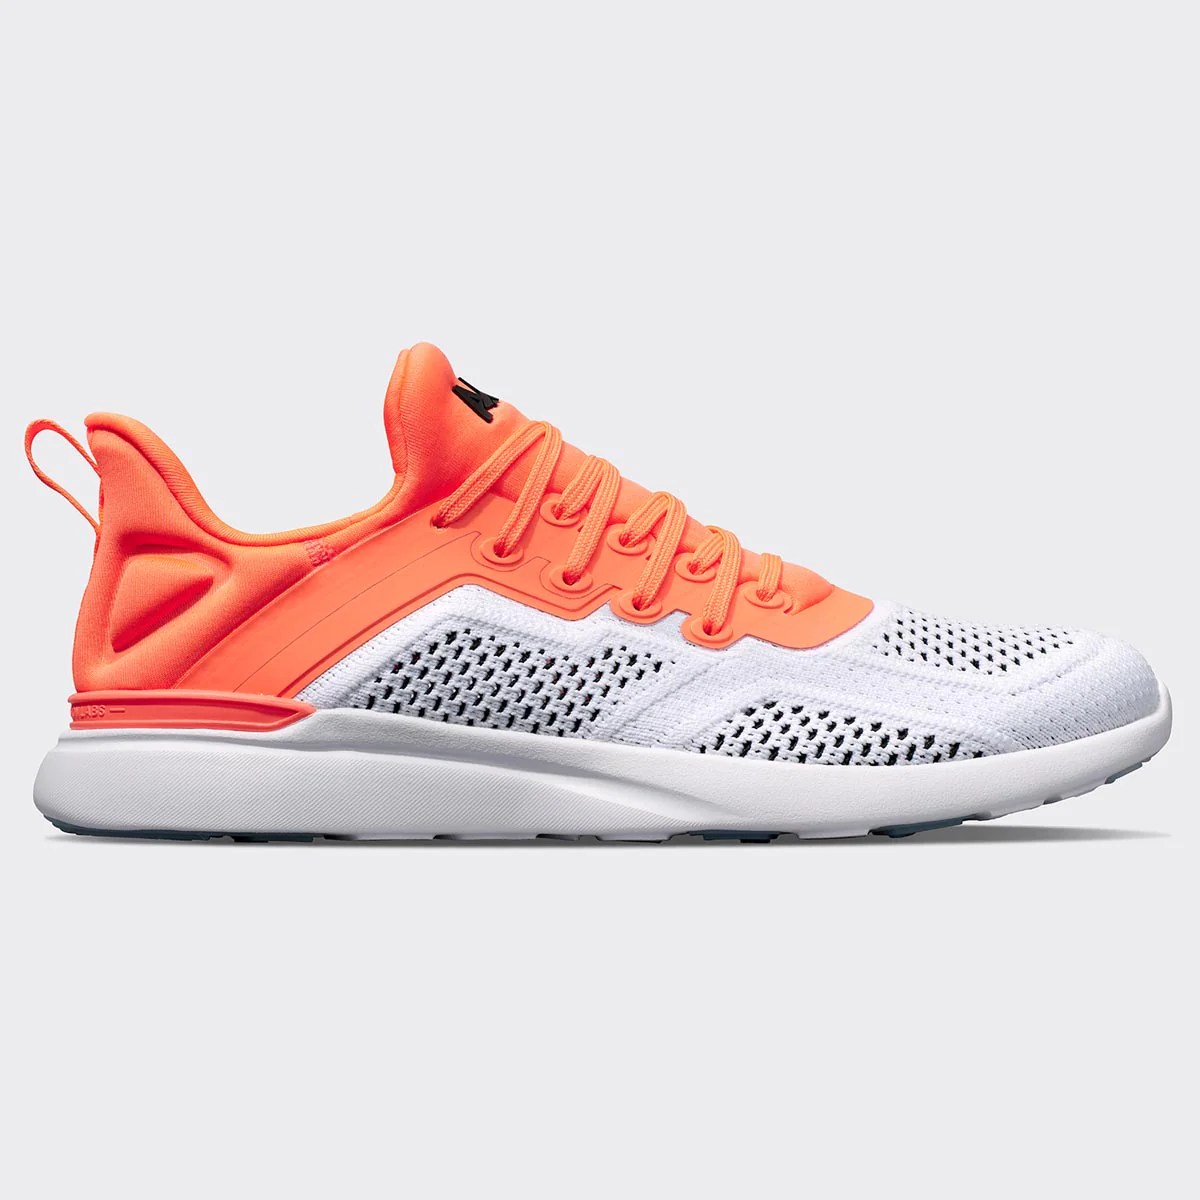 orange and white APL techloom tracer rowing shoes